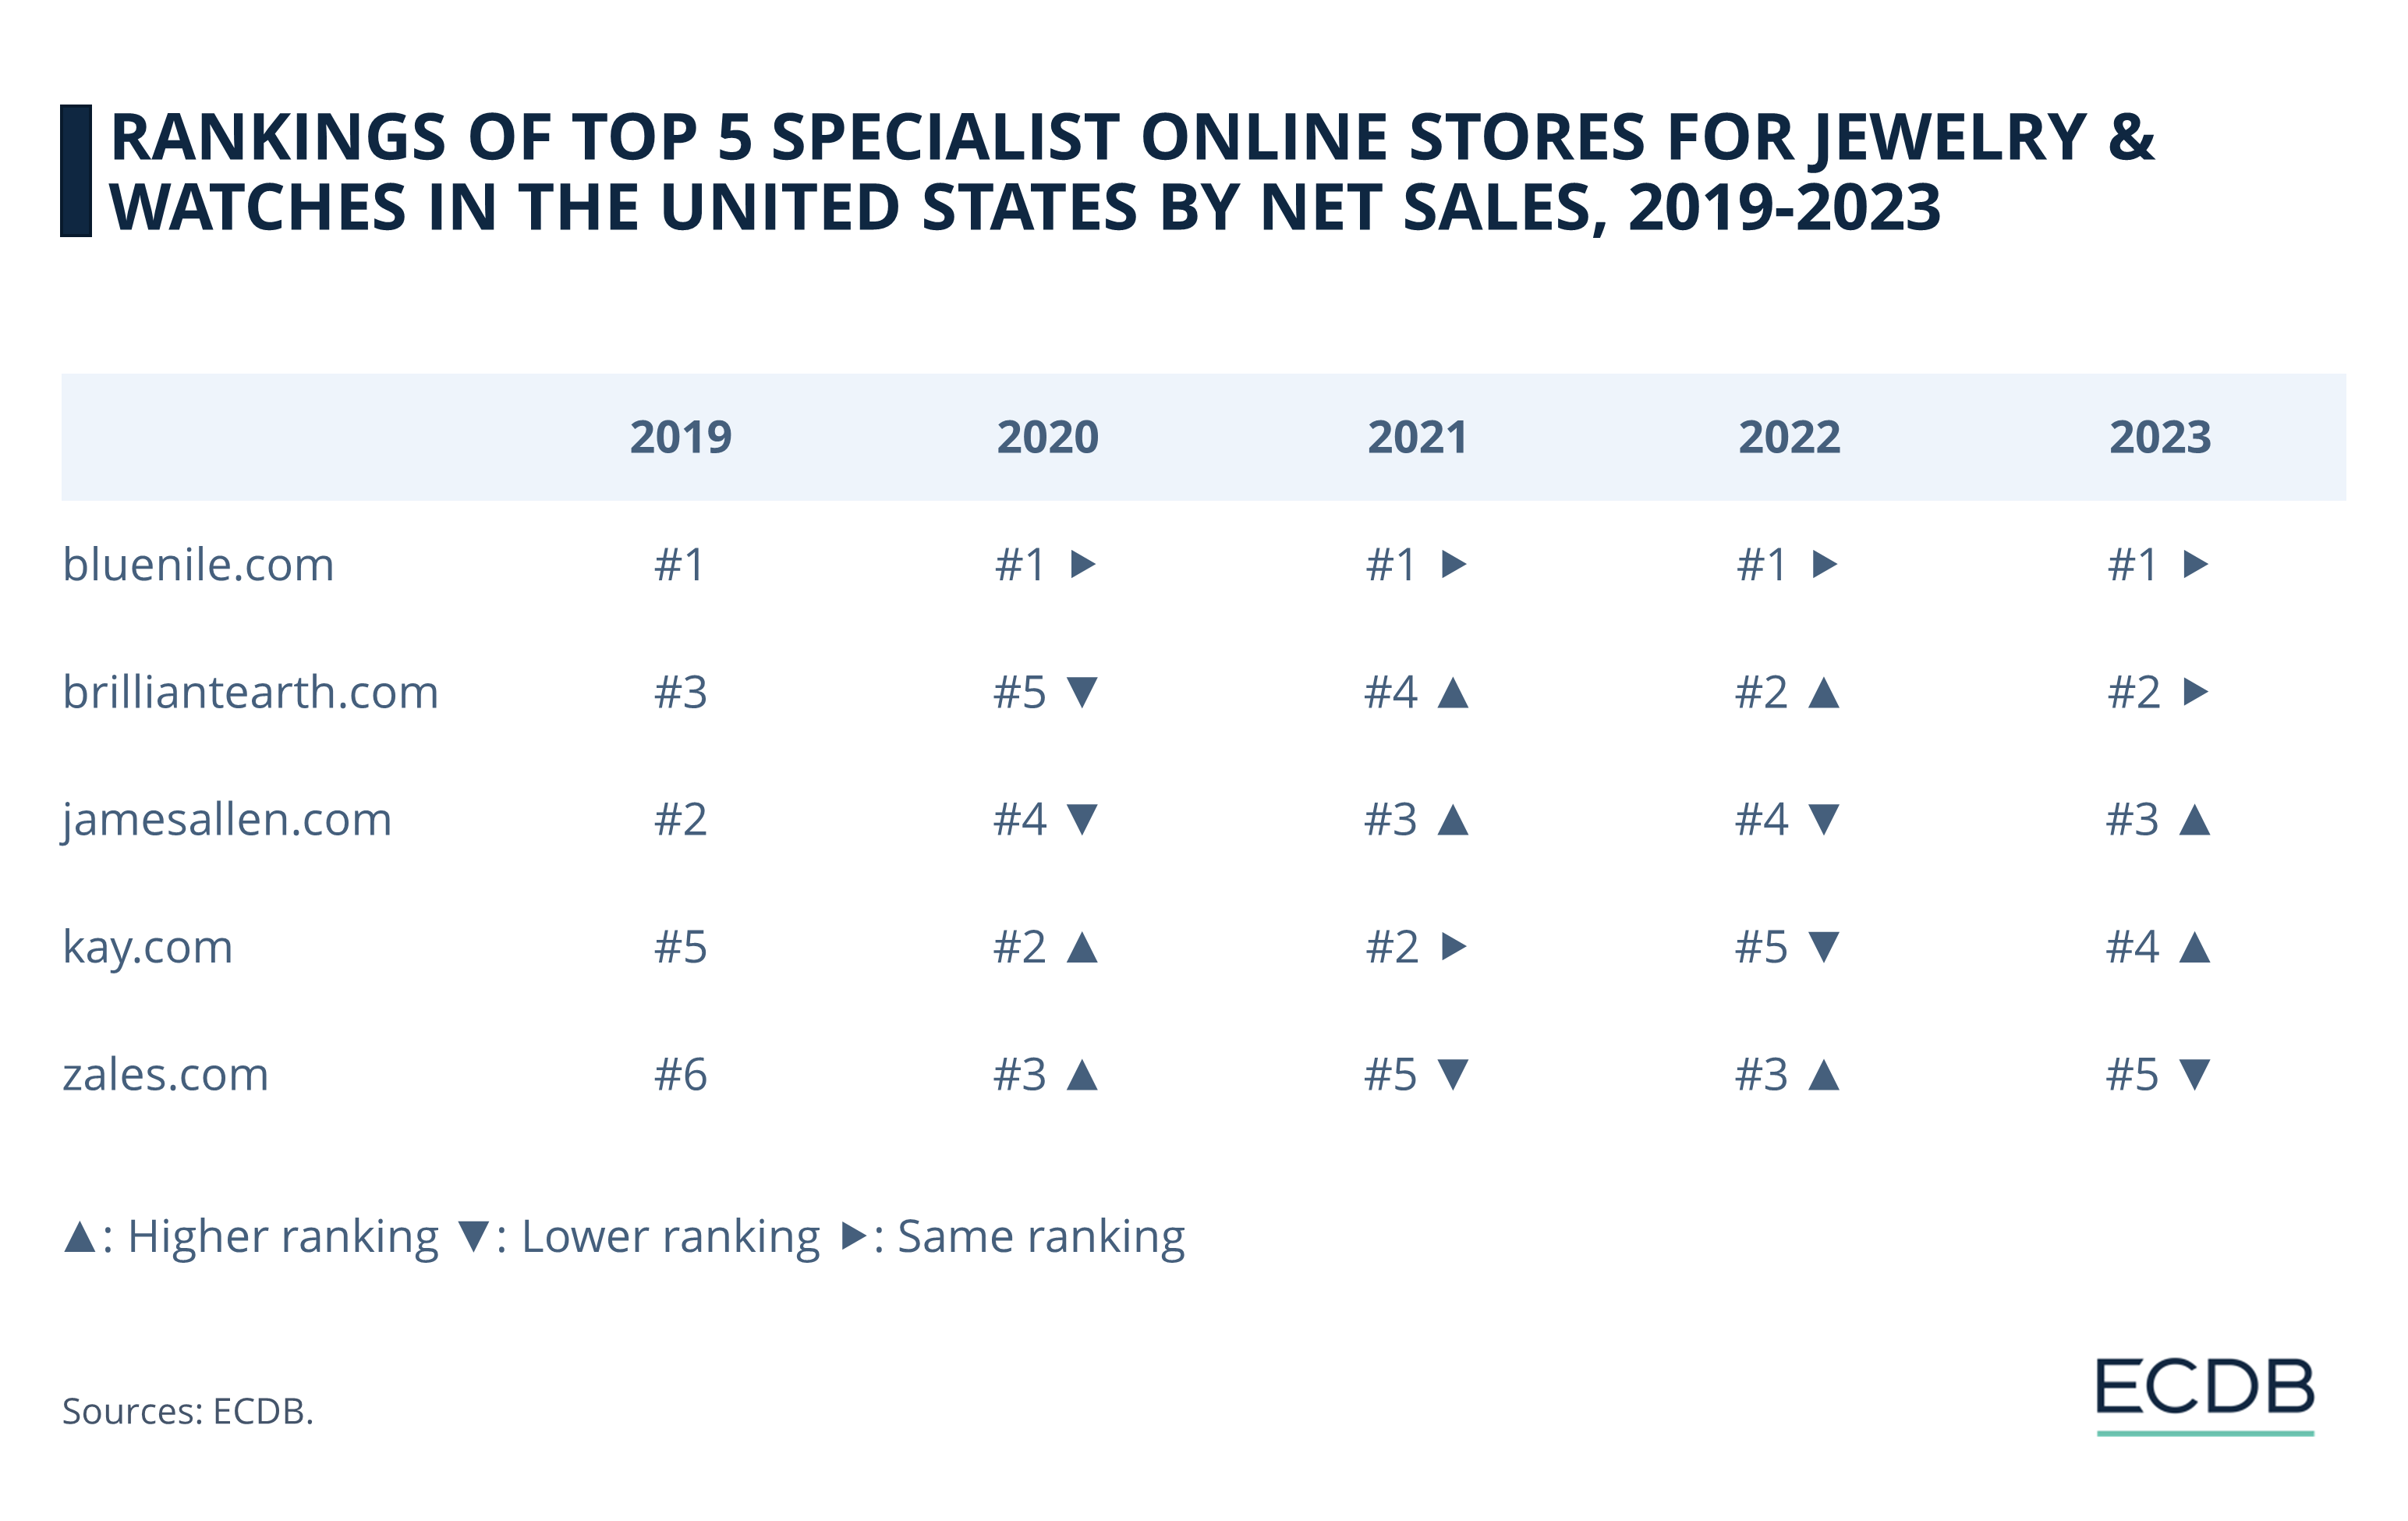 Rankings of Top 5 Specialist Online Stores for Jewelry & Watches in the United States by Net Sales, 2019-2023